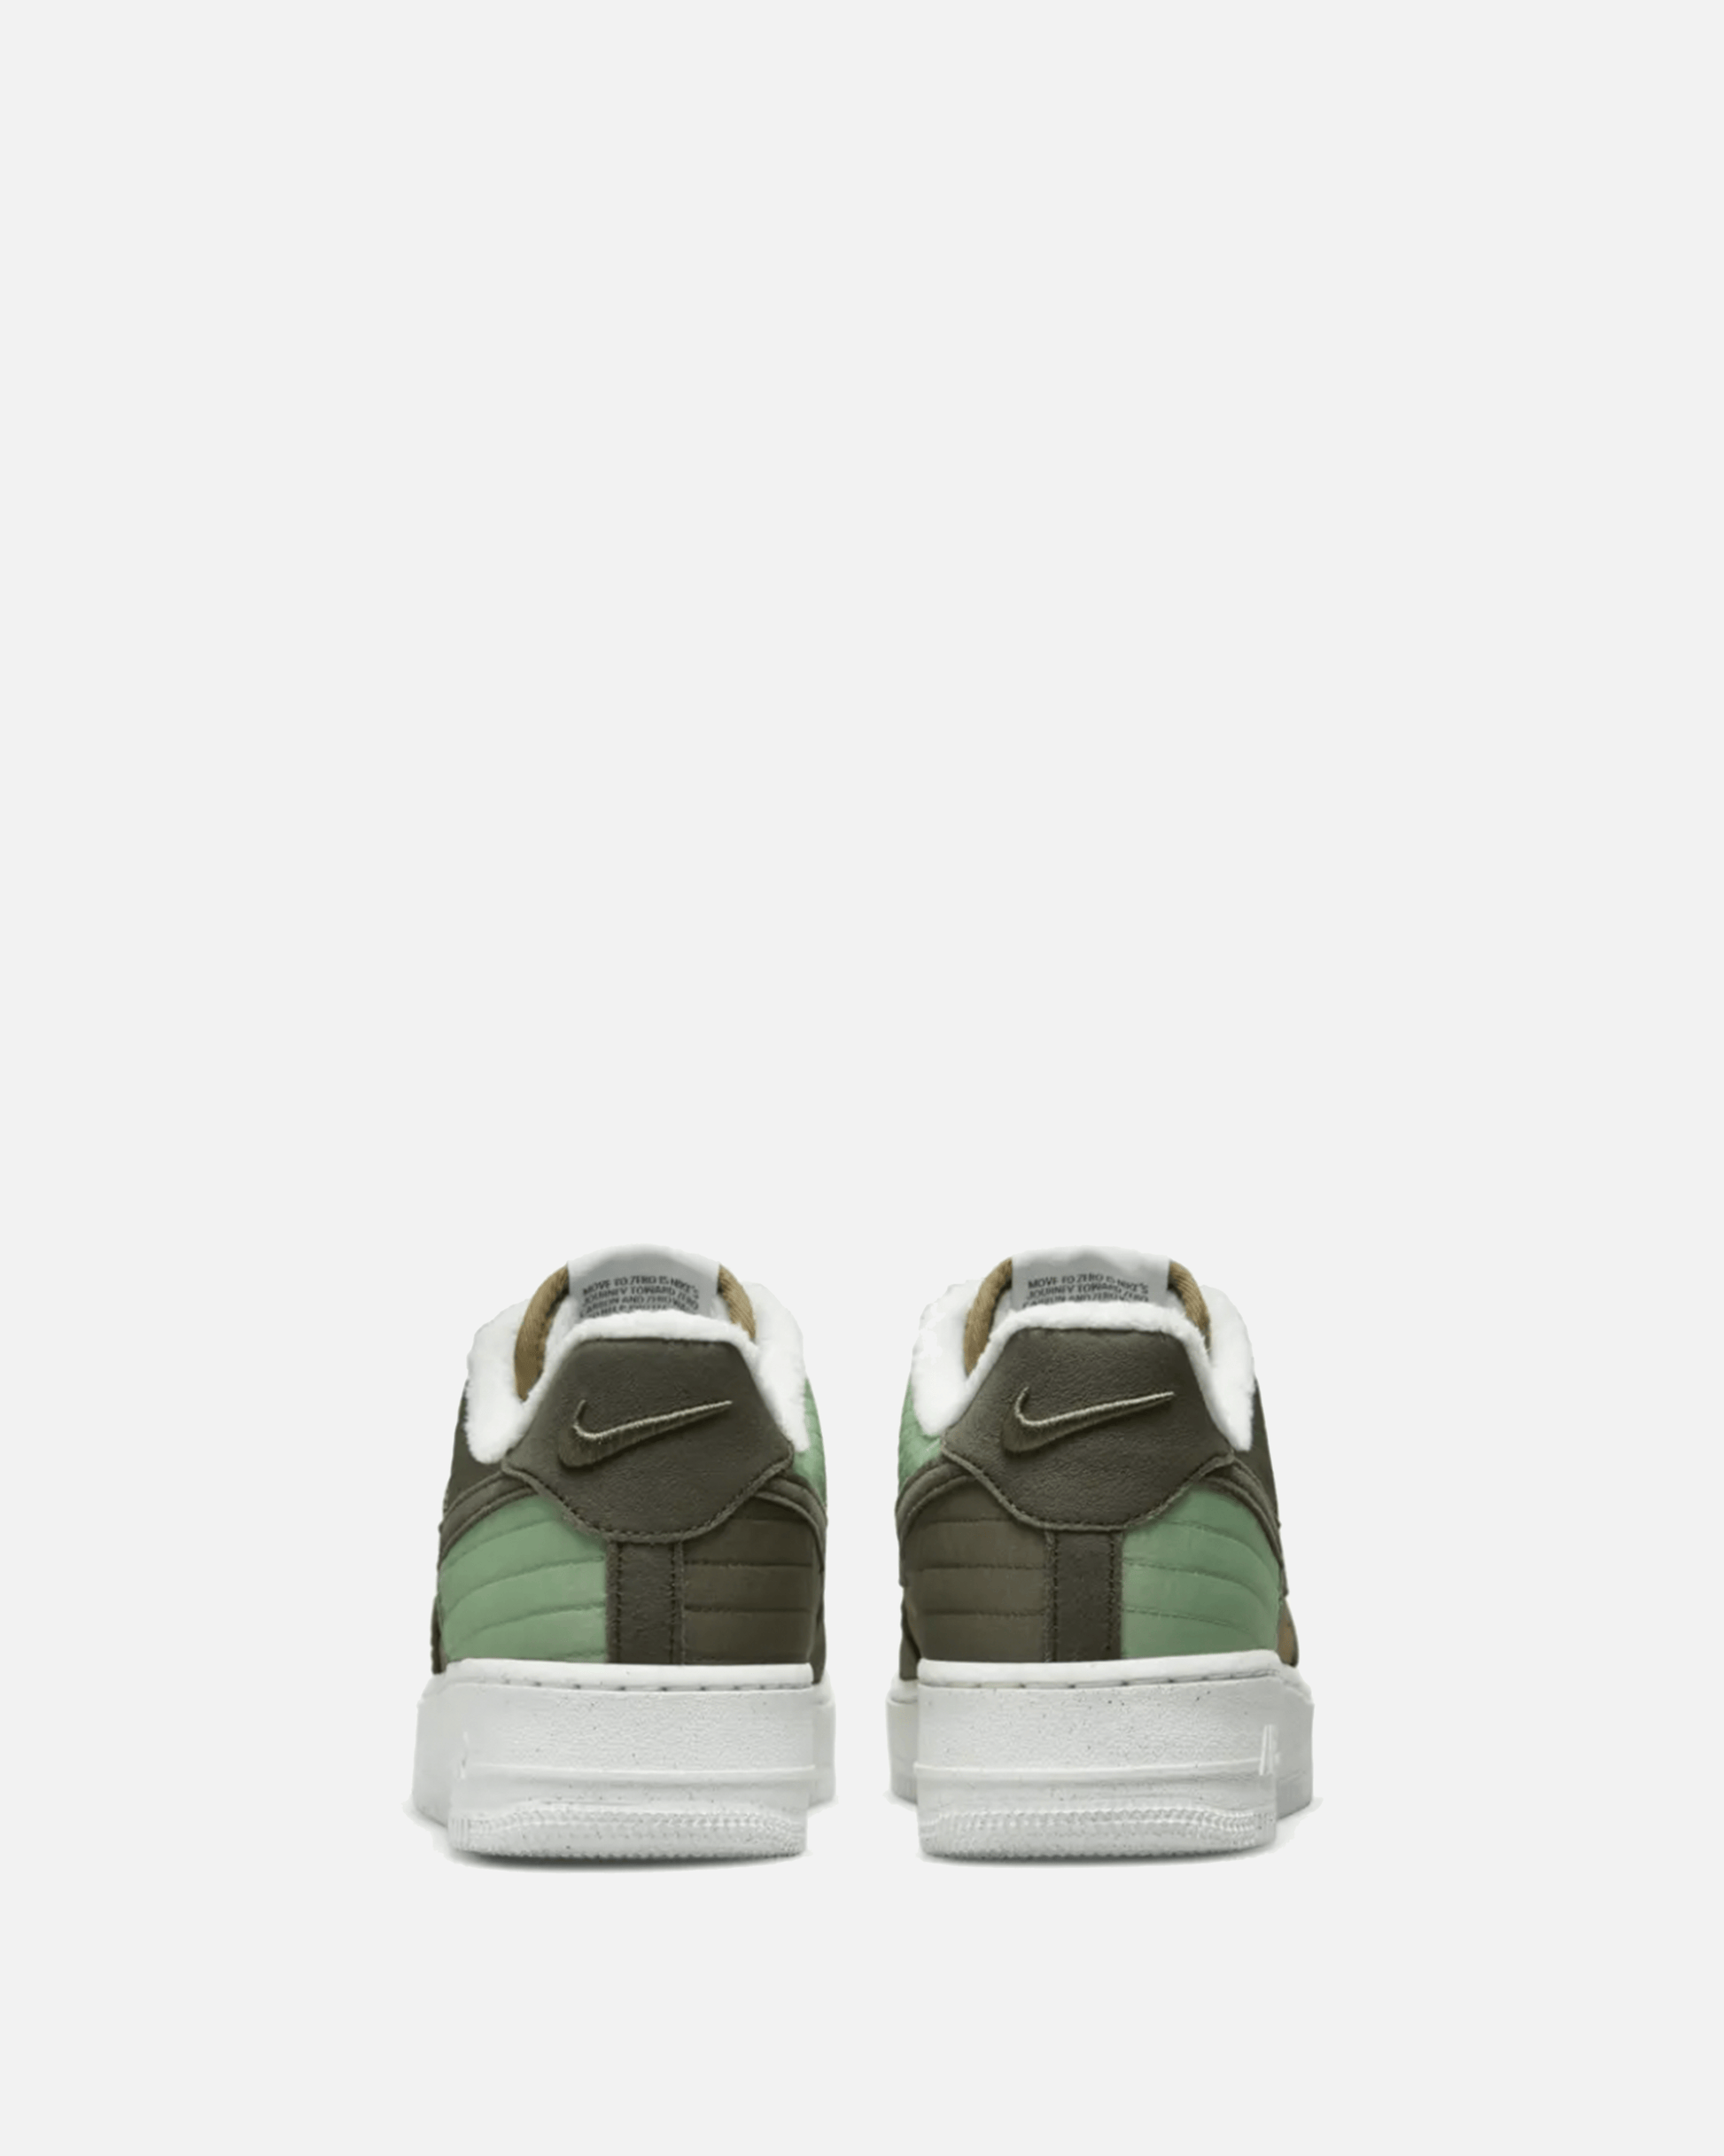 Nike Men's Sneakers Air Force 1 Toasty 'Oil Green'